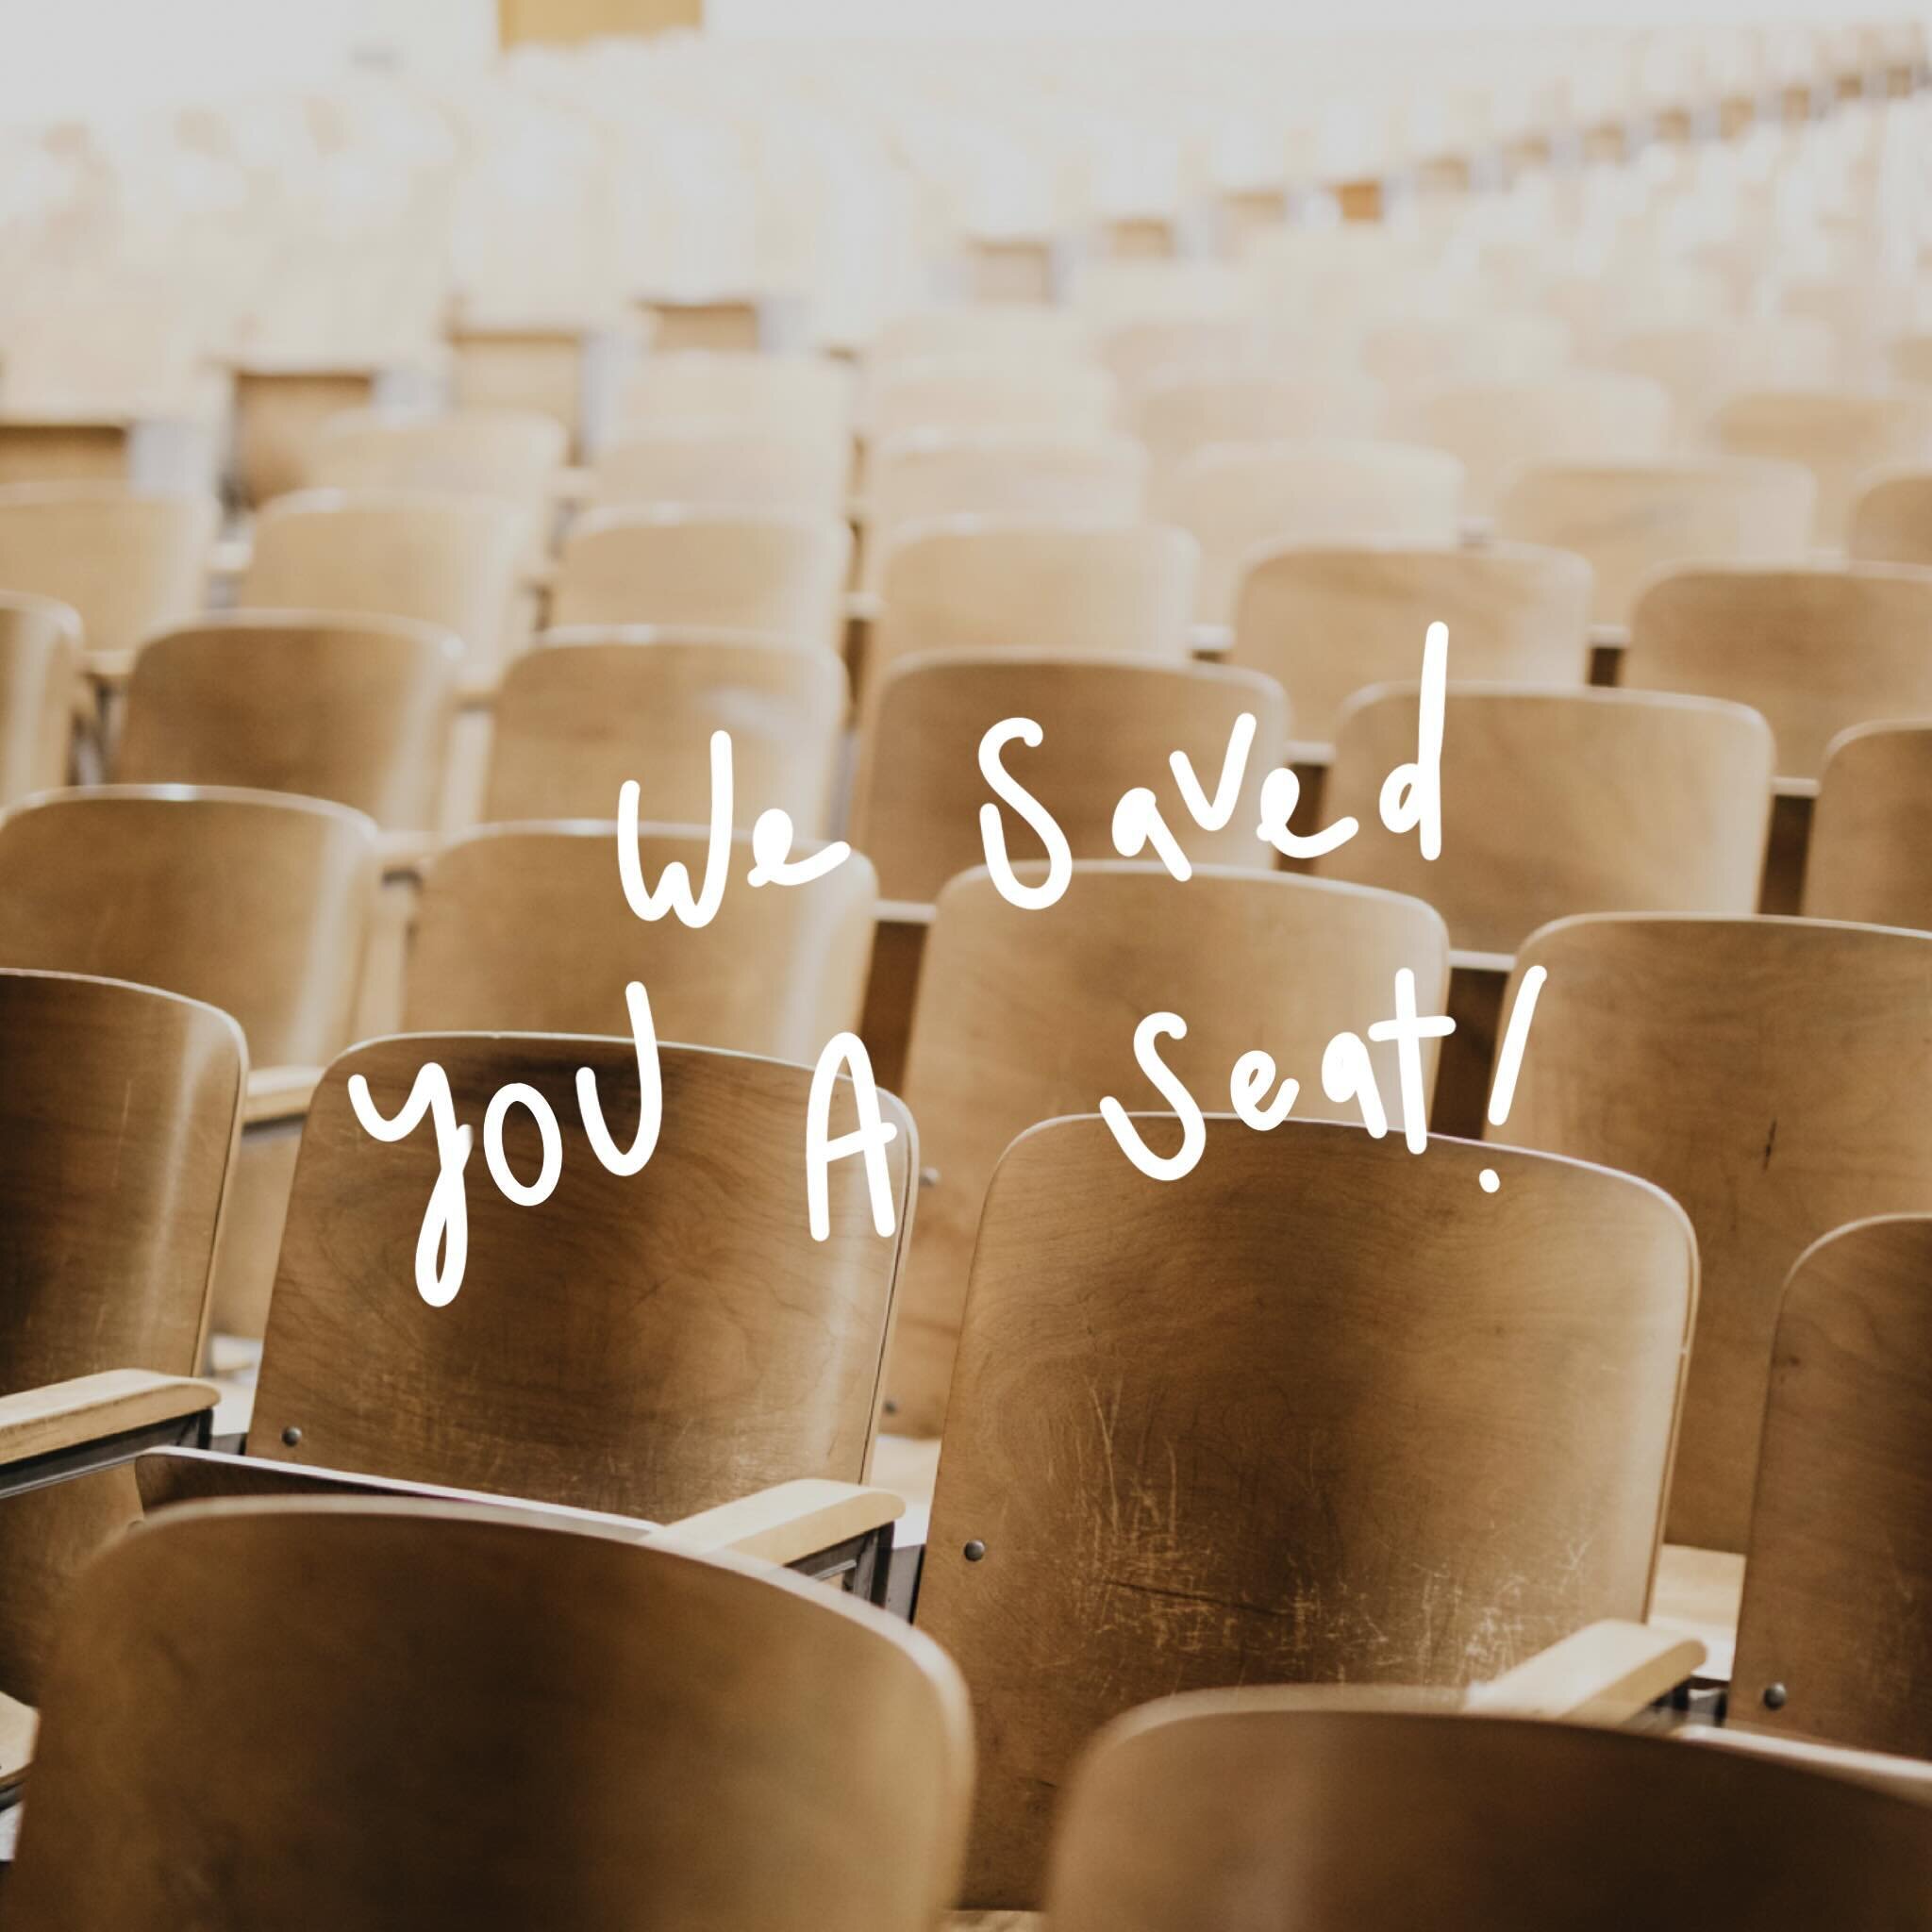 YOU&rsquo;RE INVITED!! 💌  A seat is saved for YOU at Easter service tomorrow! Come celebrate the amazing fact that Jesus Has Risen ☀️🌸🌿!!

🔎Service details in BIO!